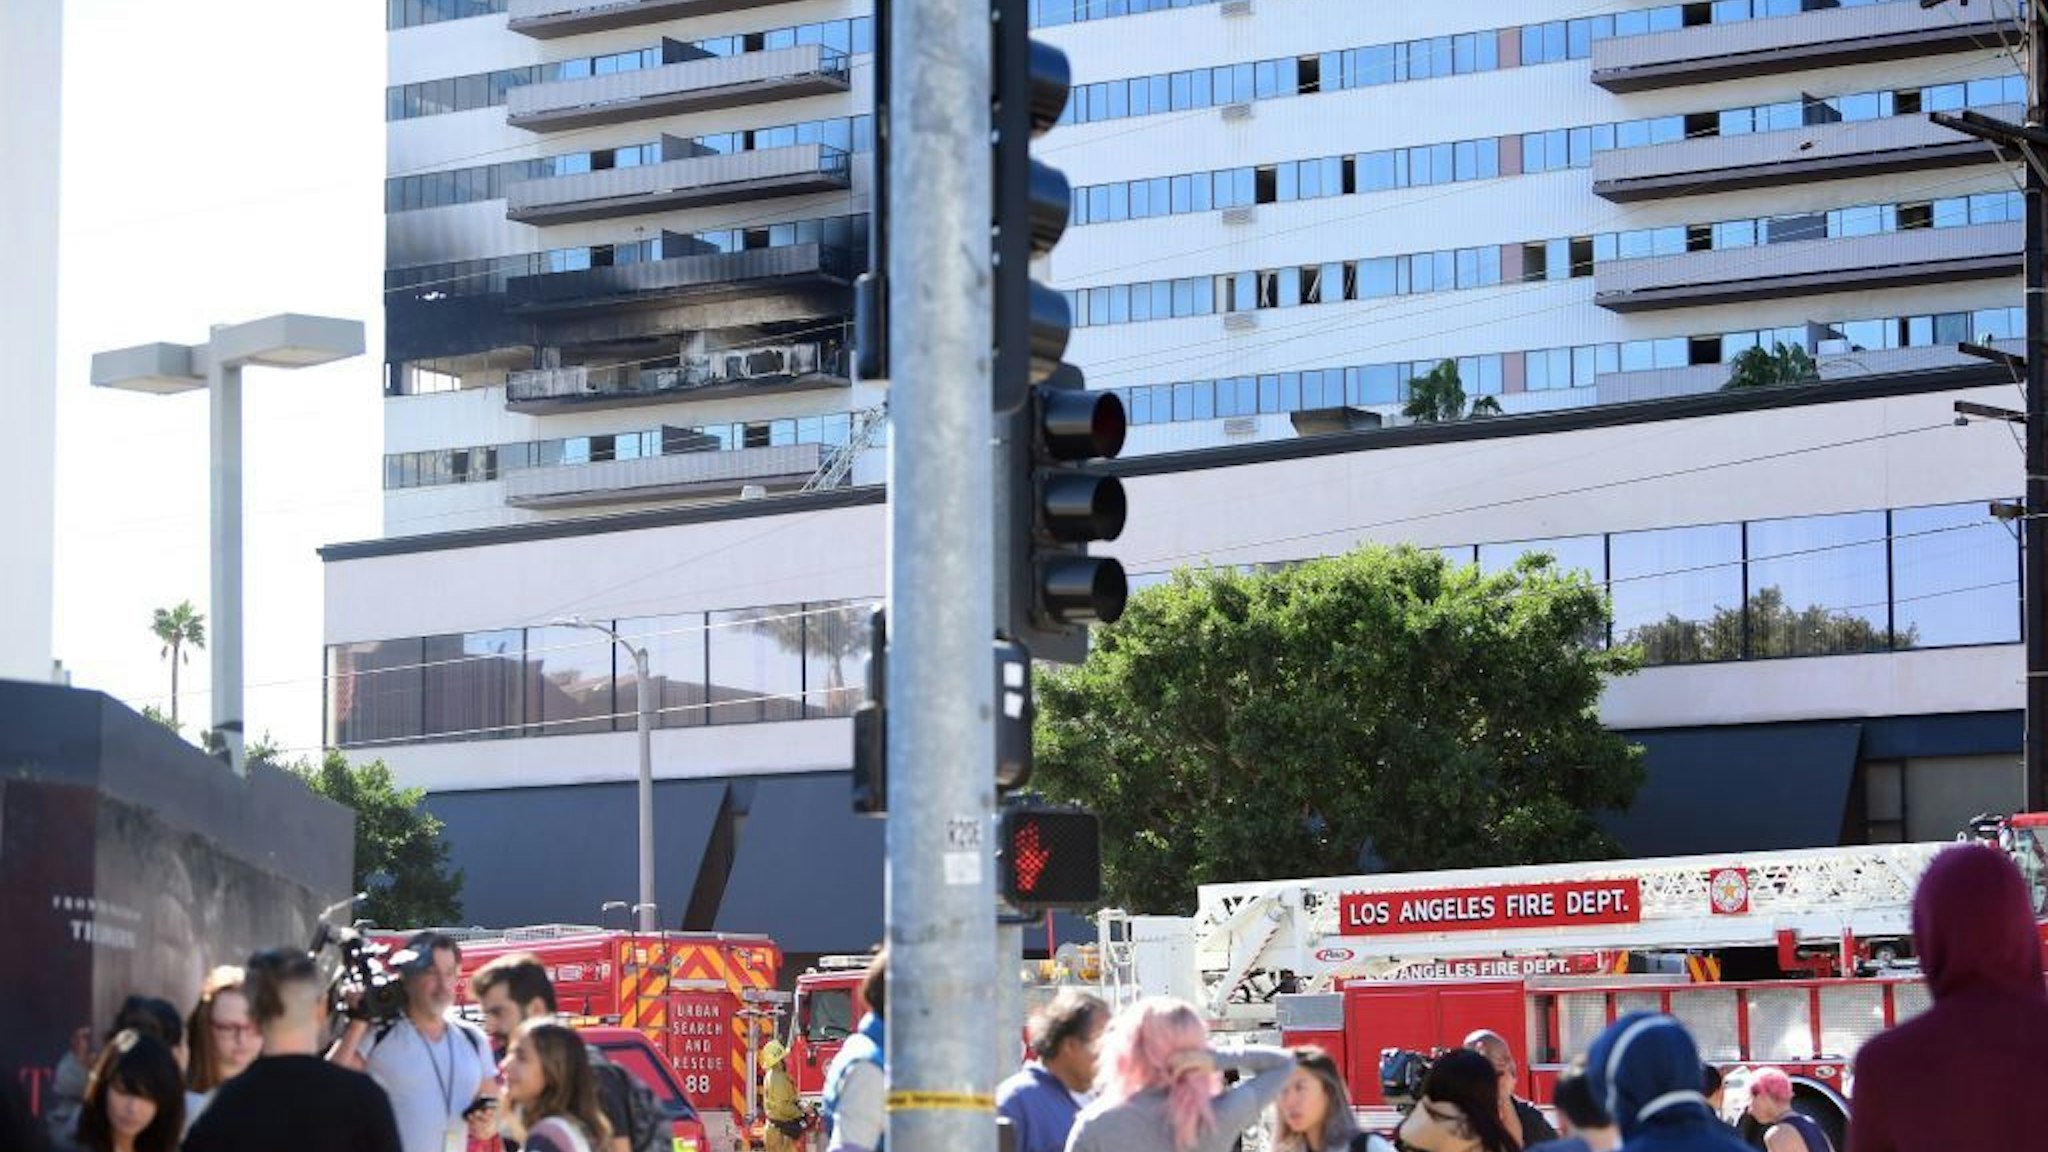 People stand outside the building after a fire on January 29, 2020 in Los Angeles, California. - A fire suspected to have been started deliberately January 29, 2020 in a high-rise residential block in Los Angeles injured eight people, including a baby, and prompted a massive response by firefighters.Earlier reports had said several people had jumped from the 25-story Barrington Plaza in the west of the city but authorities later clarified that was not the case."No one jumped, there are no fatalities," deputy fire chief Armando Hogan told reporters. "Two people contemplated jumping but we told them to stay where they were." (Photo by FREDERIC J. BROWN / AFP)